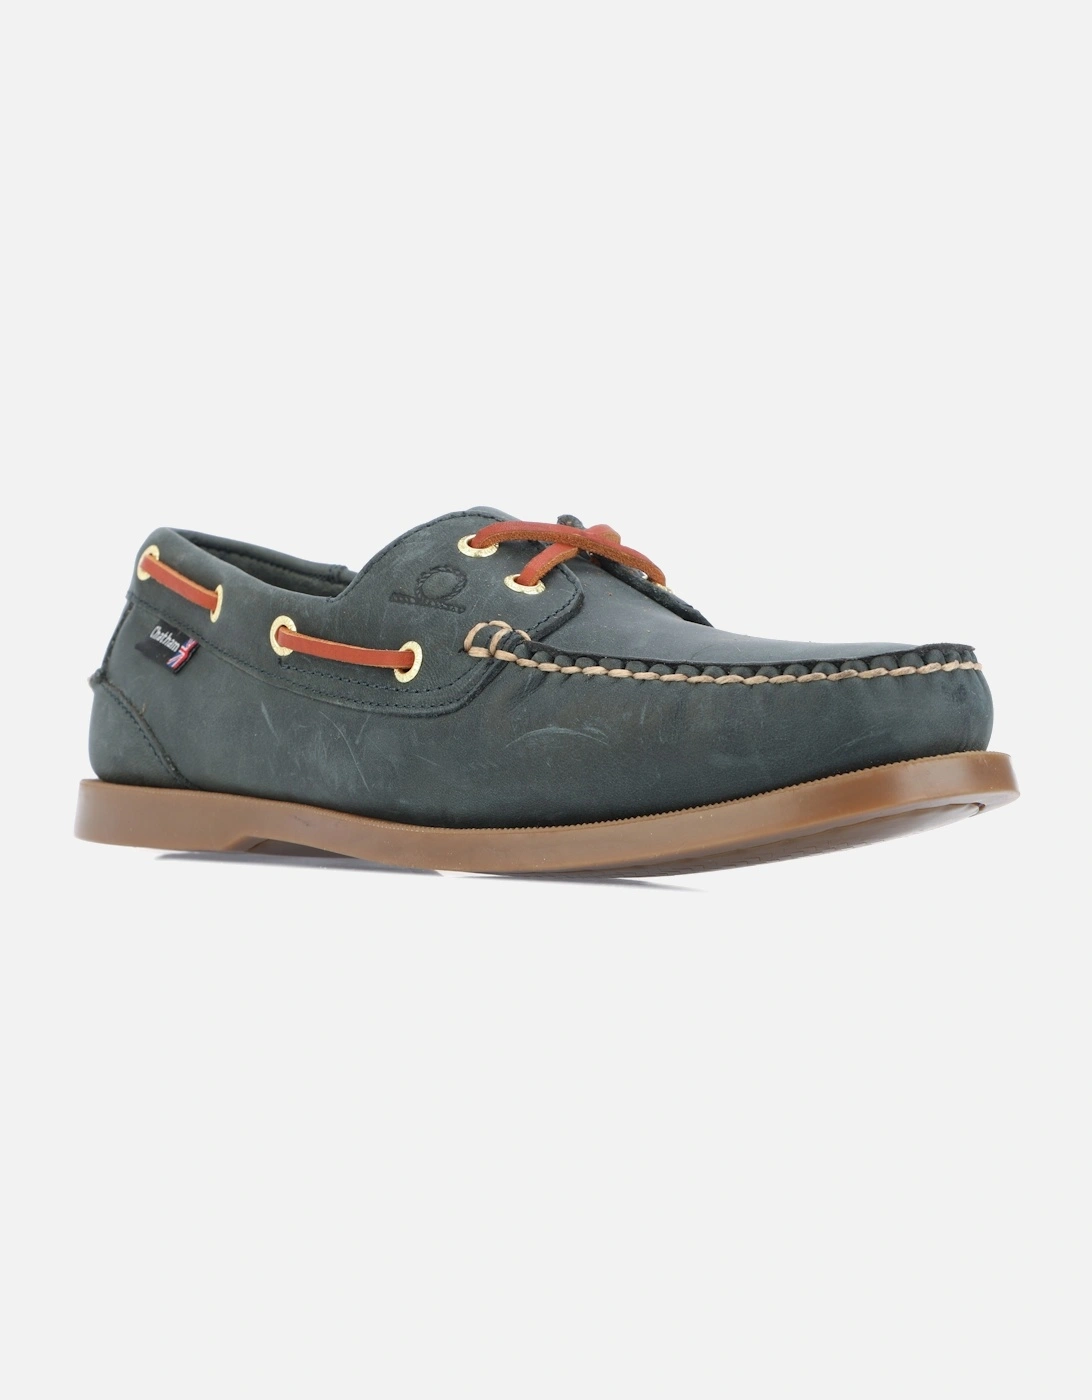 Mens Deck II G2 Premium Leather Boat Shoes